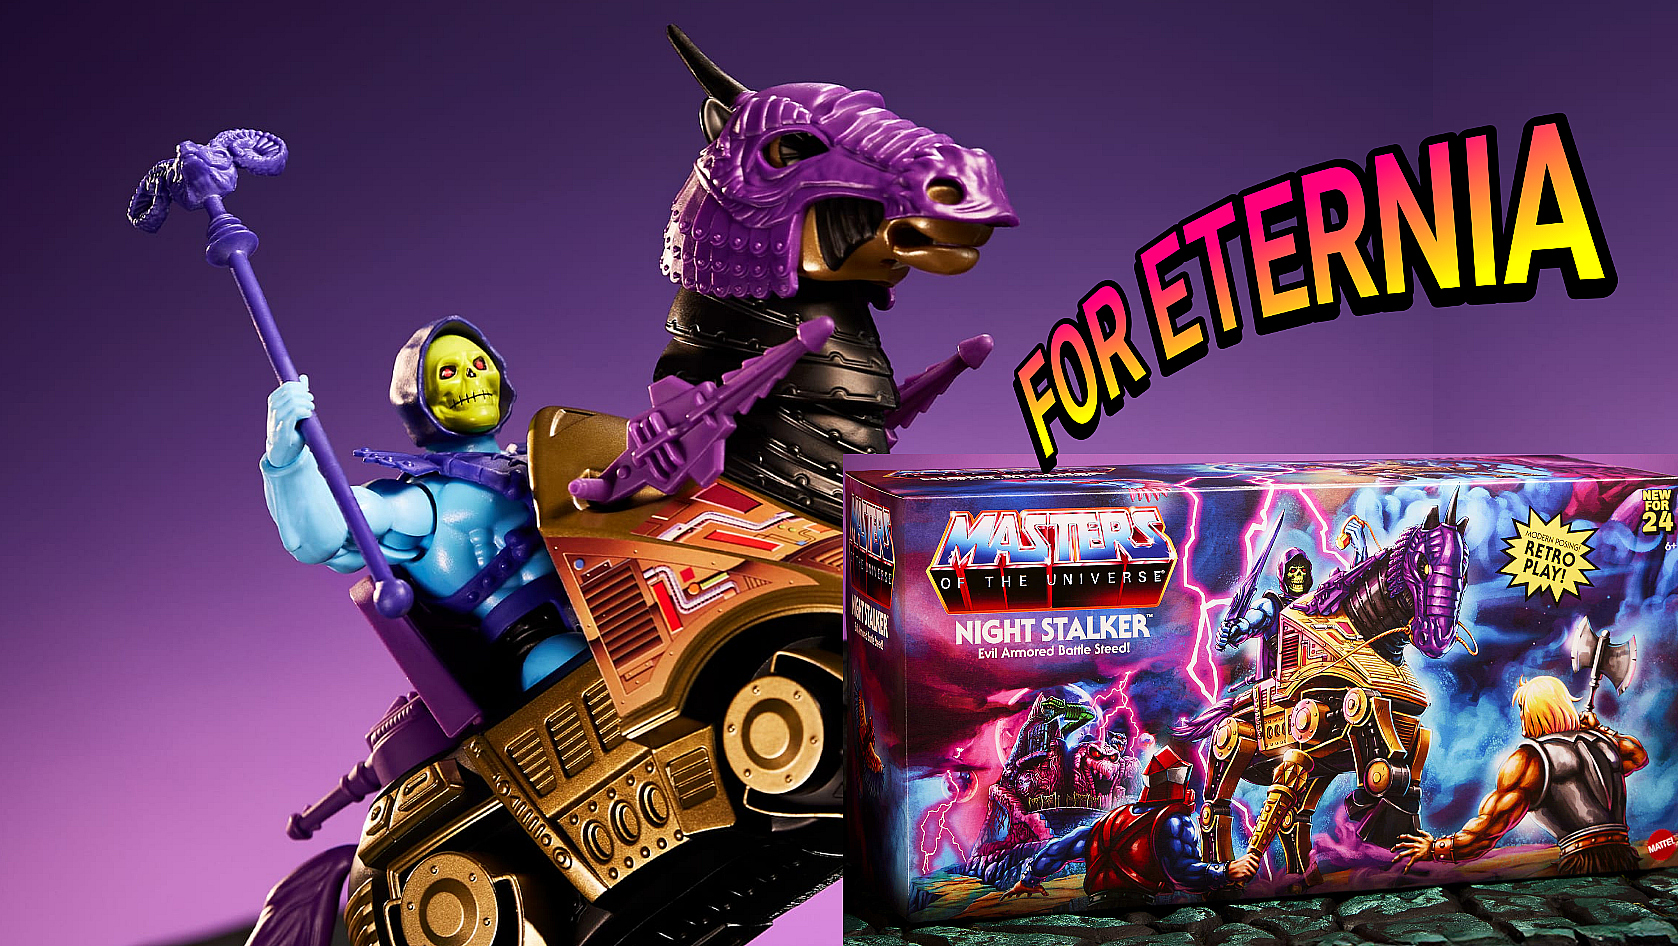 New Pictures & Details are revealed for the Masters of the Universe: Origins NIGHT STALKER Mattel Creations Exclusive steed